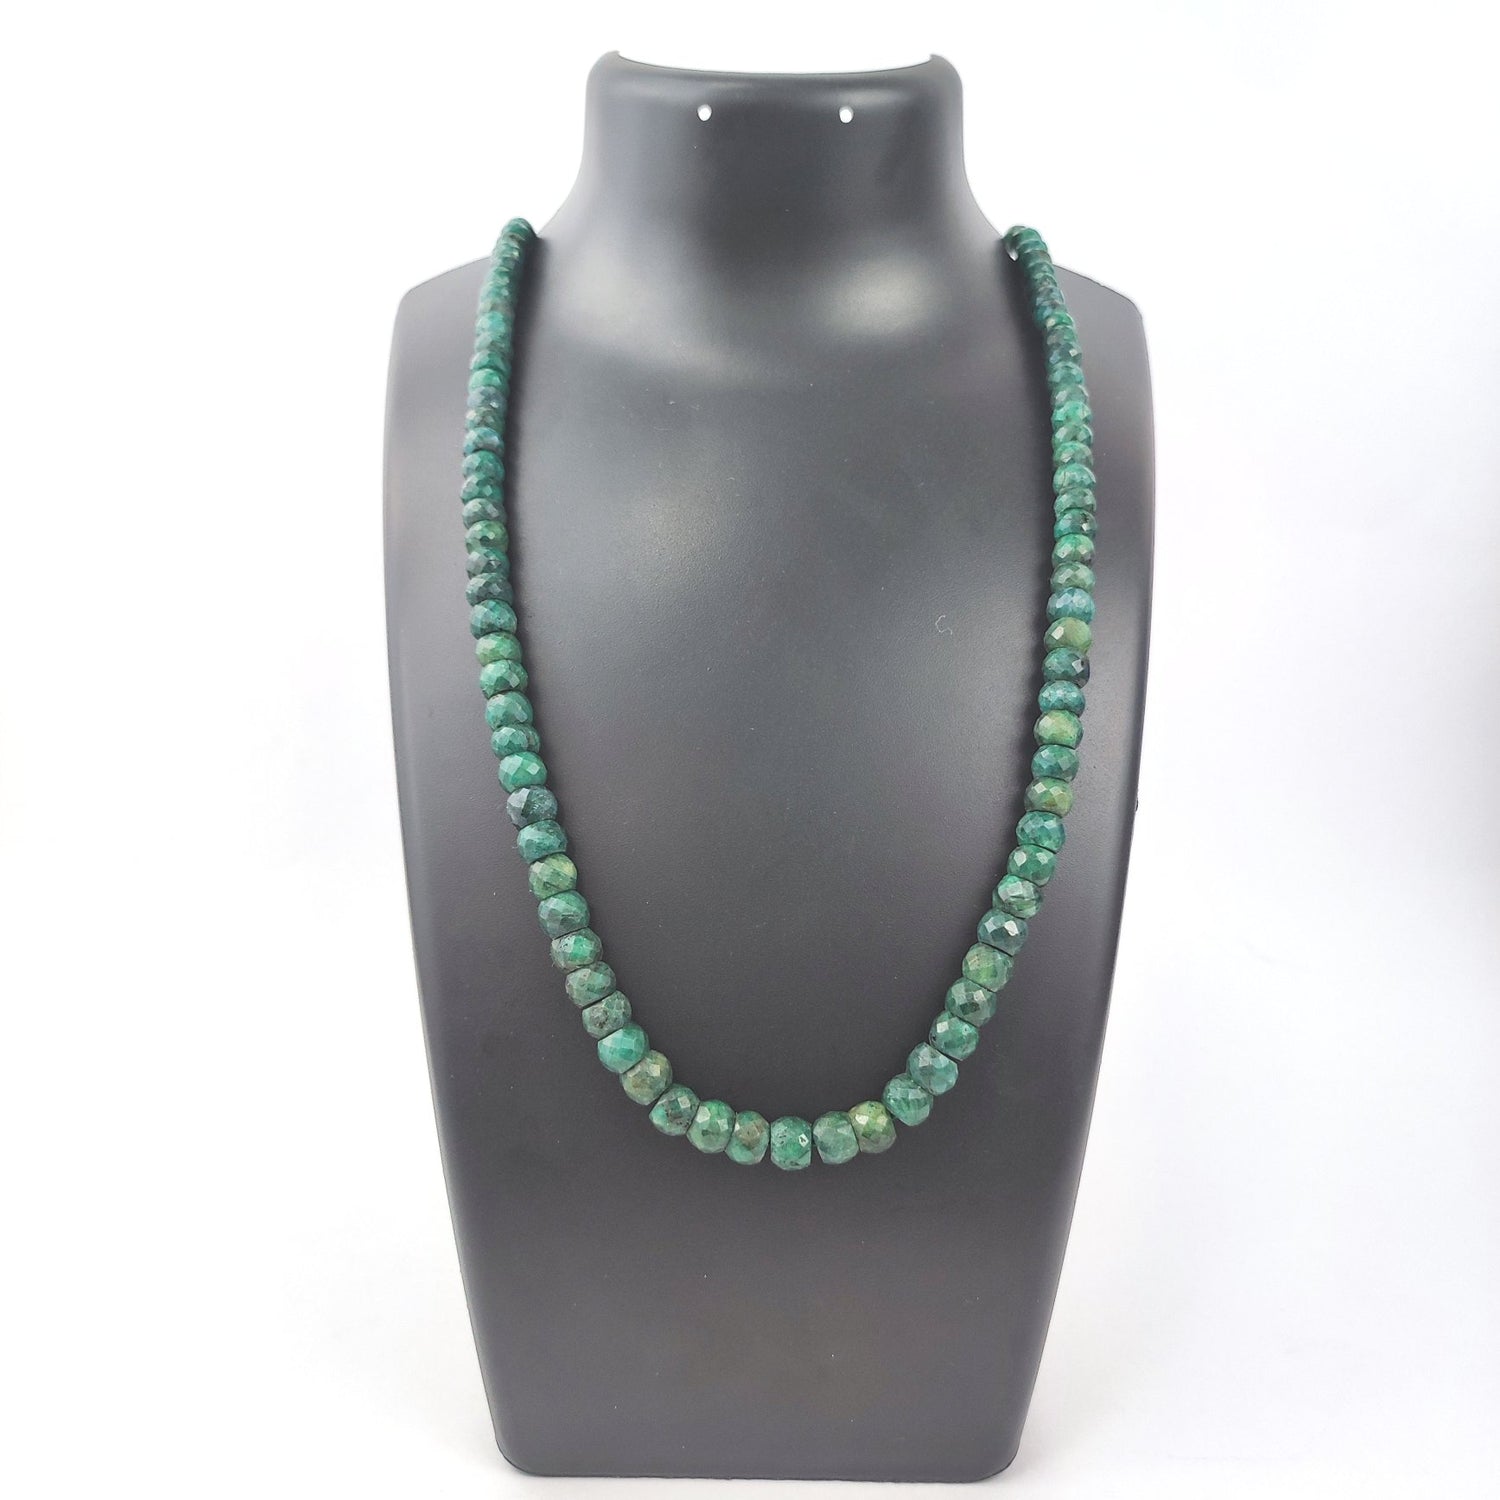 Emerald Oval Cut Beads 8mm Necklace